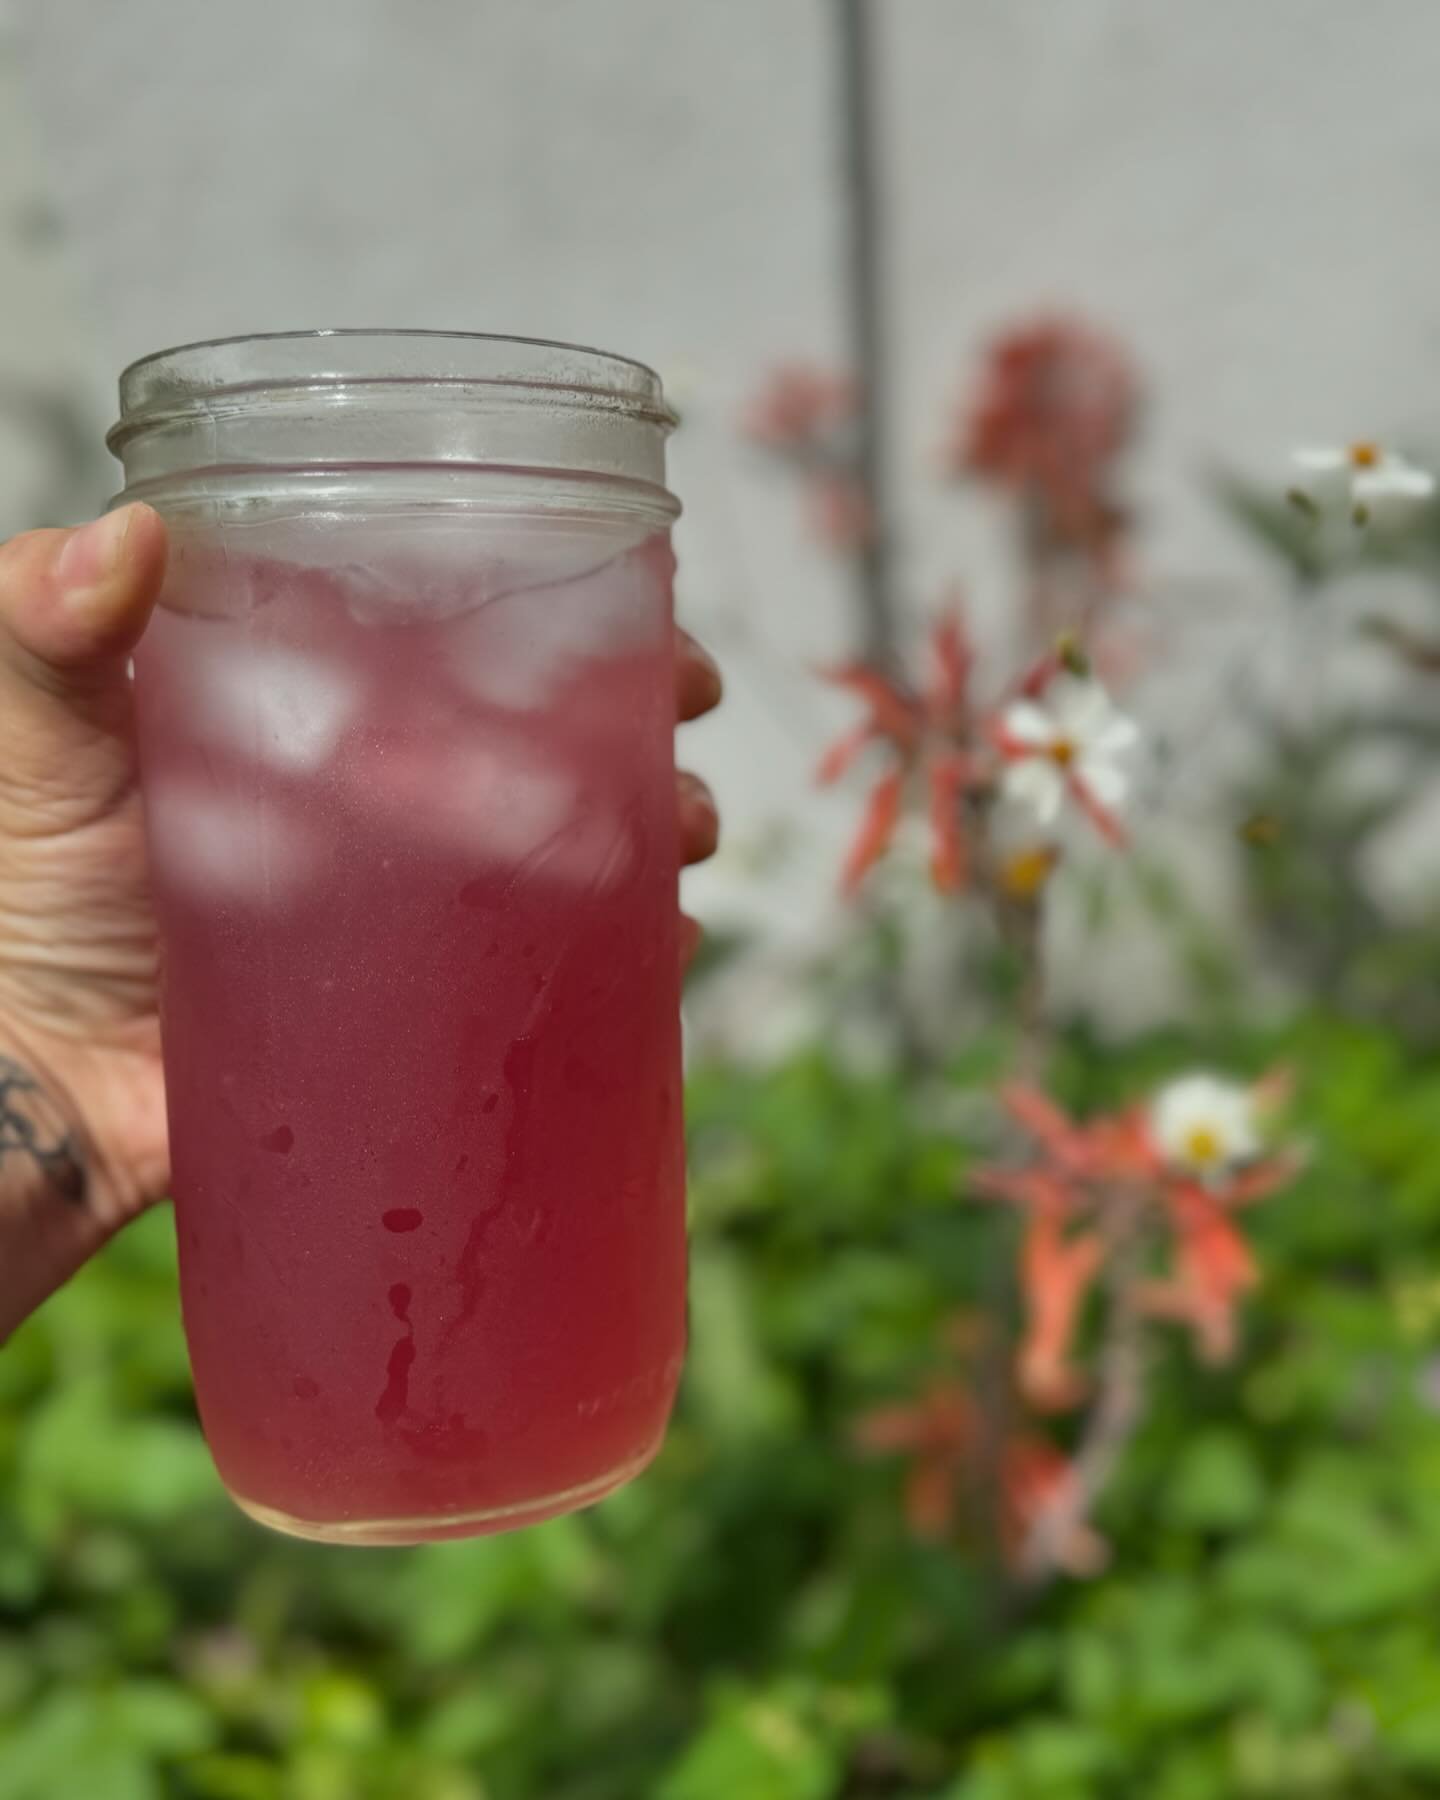 Herbal tea for hot times 🔥☀️😵&zwj;💫

It&rsquo;s Aries season, the fire sign ruled by Mars initiating us into action. 
Anyone feel a little spicy lately, irritable, frustrated? Astrology aside, these are times where it is totally righteous to feel 